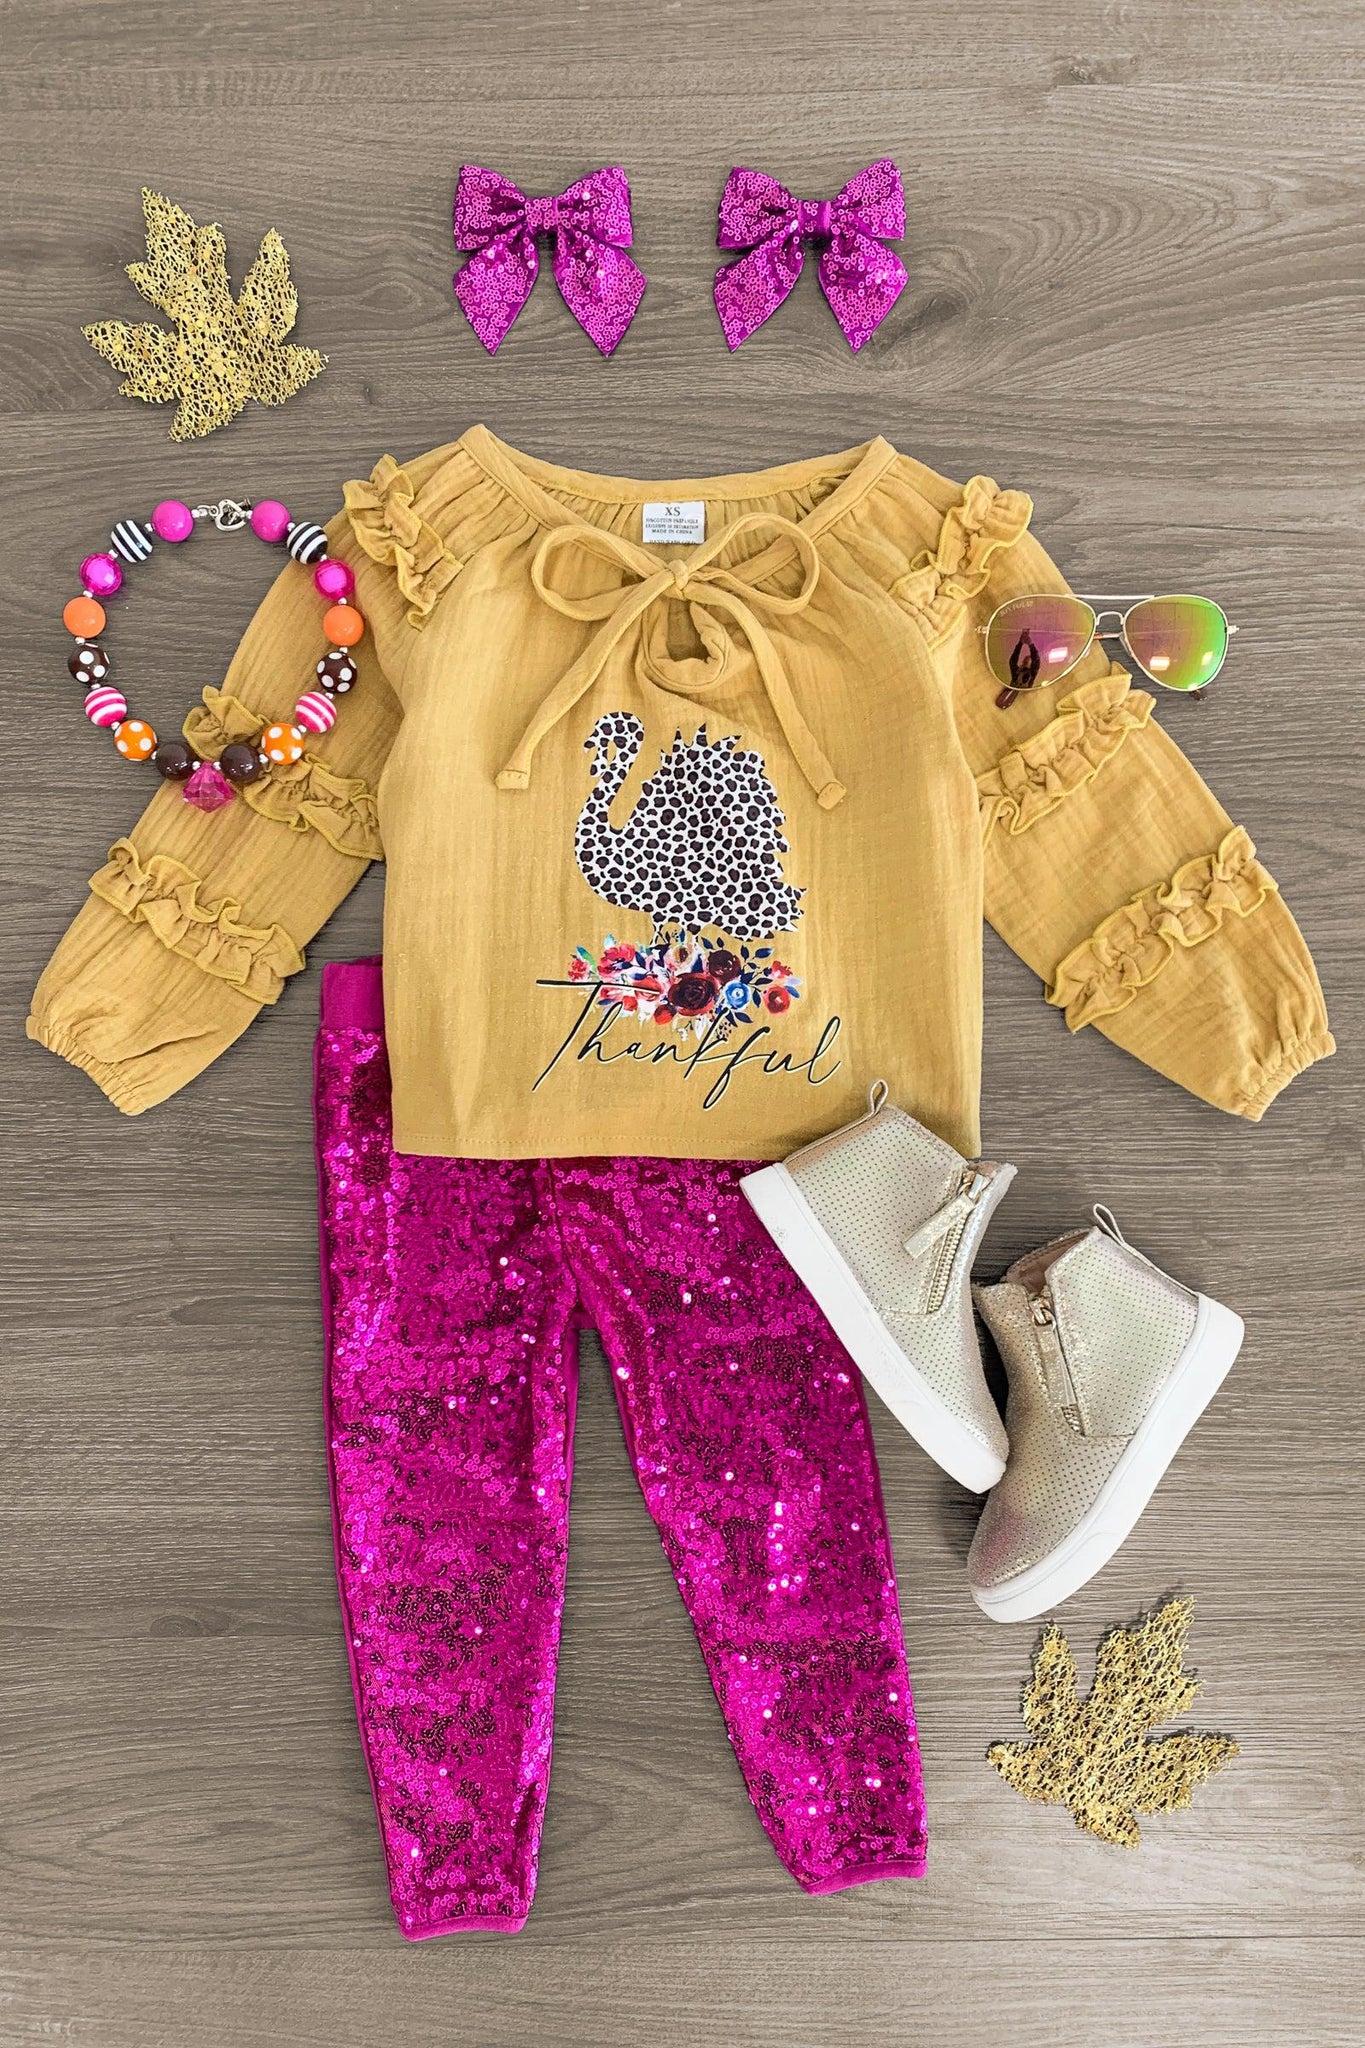 "Thankful" Pink & Mustard Sequin Pant Set - Sparkle in Pink